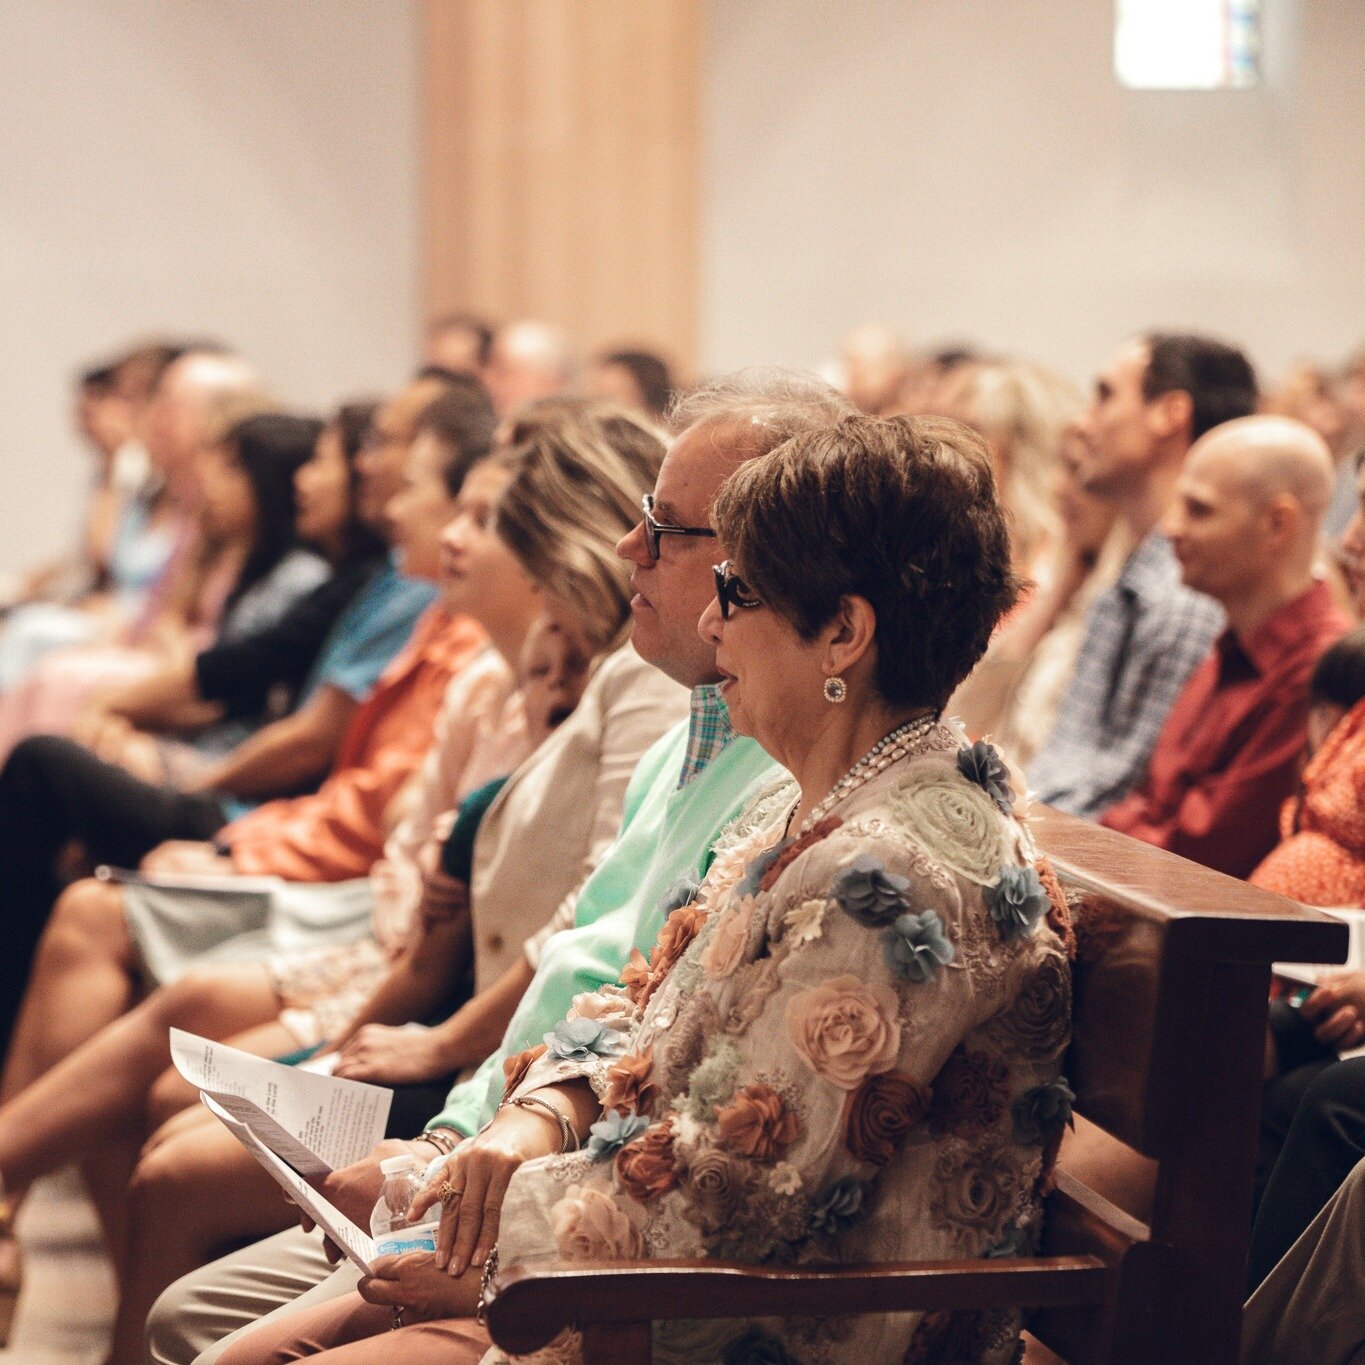 HAPPY SUNDAY | ANNOUNCEMENTS ⬇

🤩Welcome+ | Whether you are new to St. Ann, or a seasoned parishioner who wants to get connected, we welcome you after the 10am Mass to meet members of our faith community and connect with other new members of our com